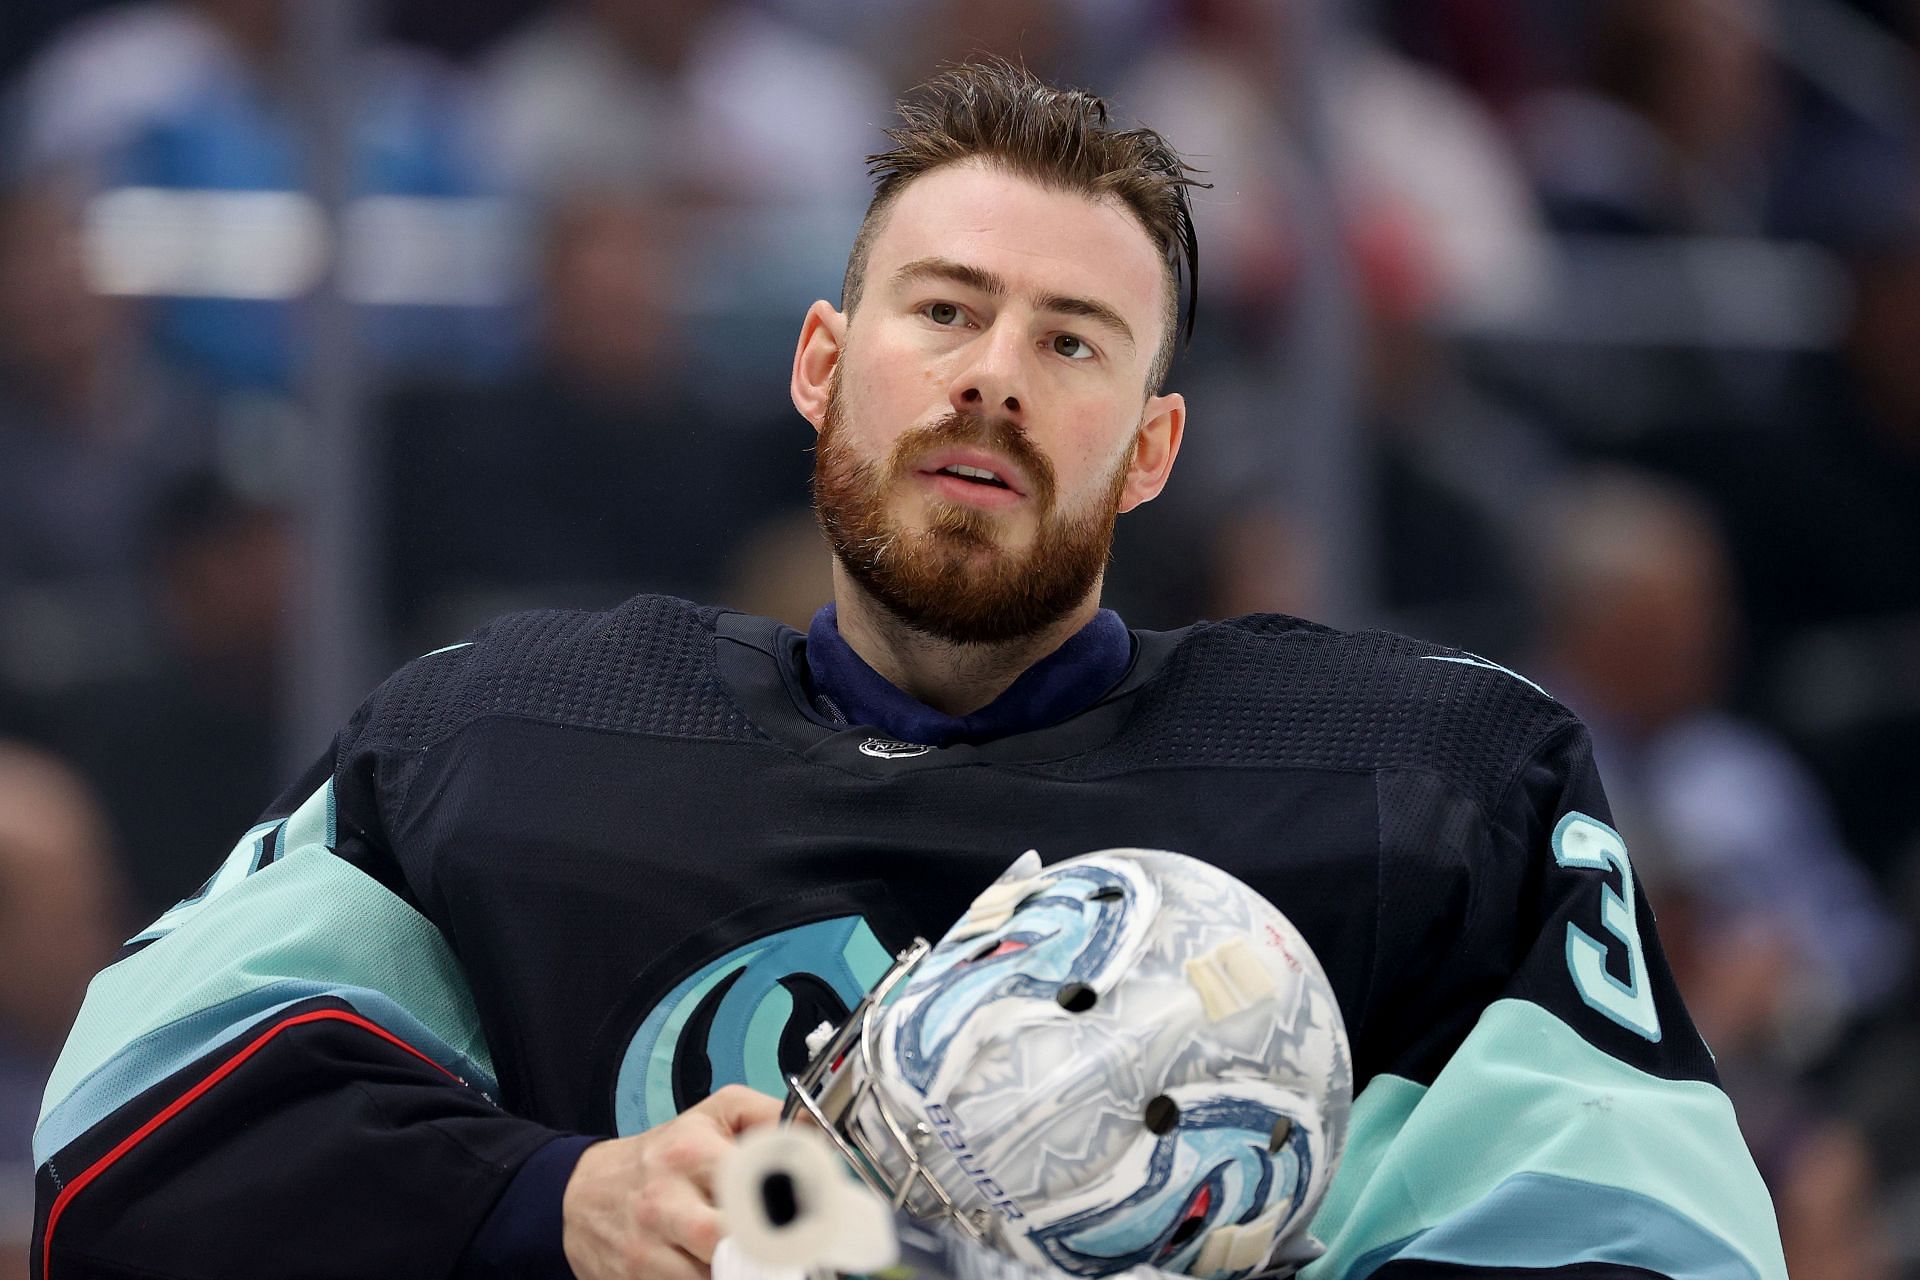 Here's why the Kraken is expected to play Philipp Grubauer and